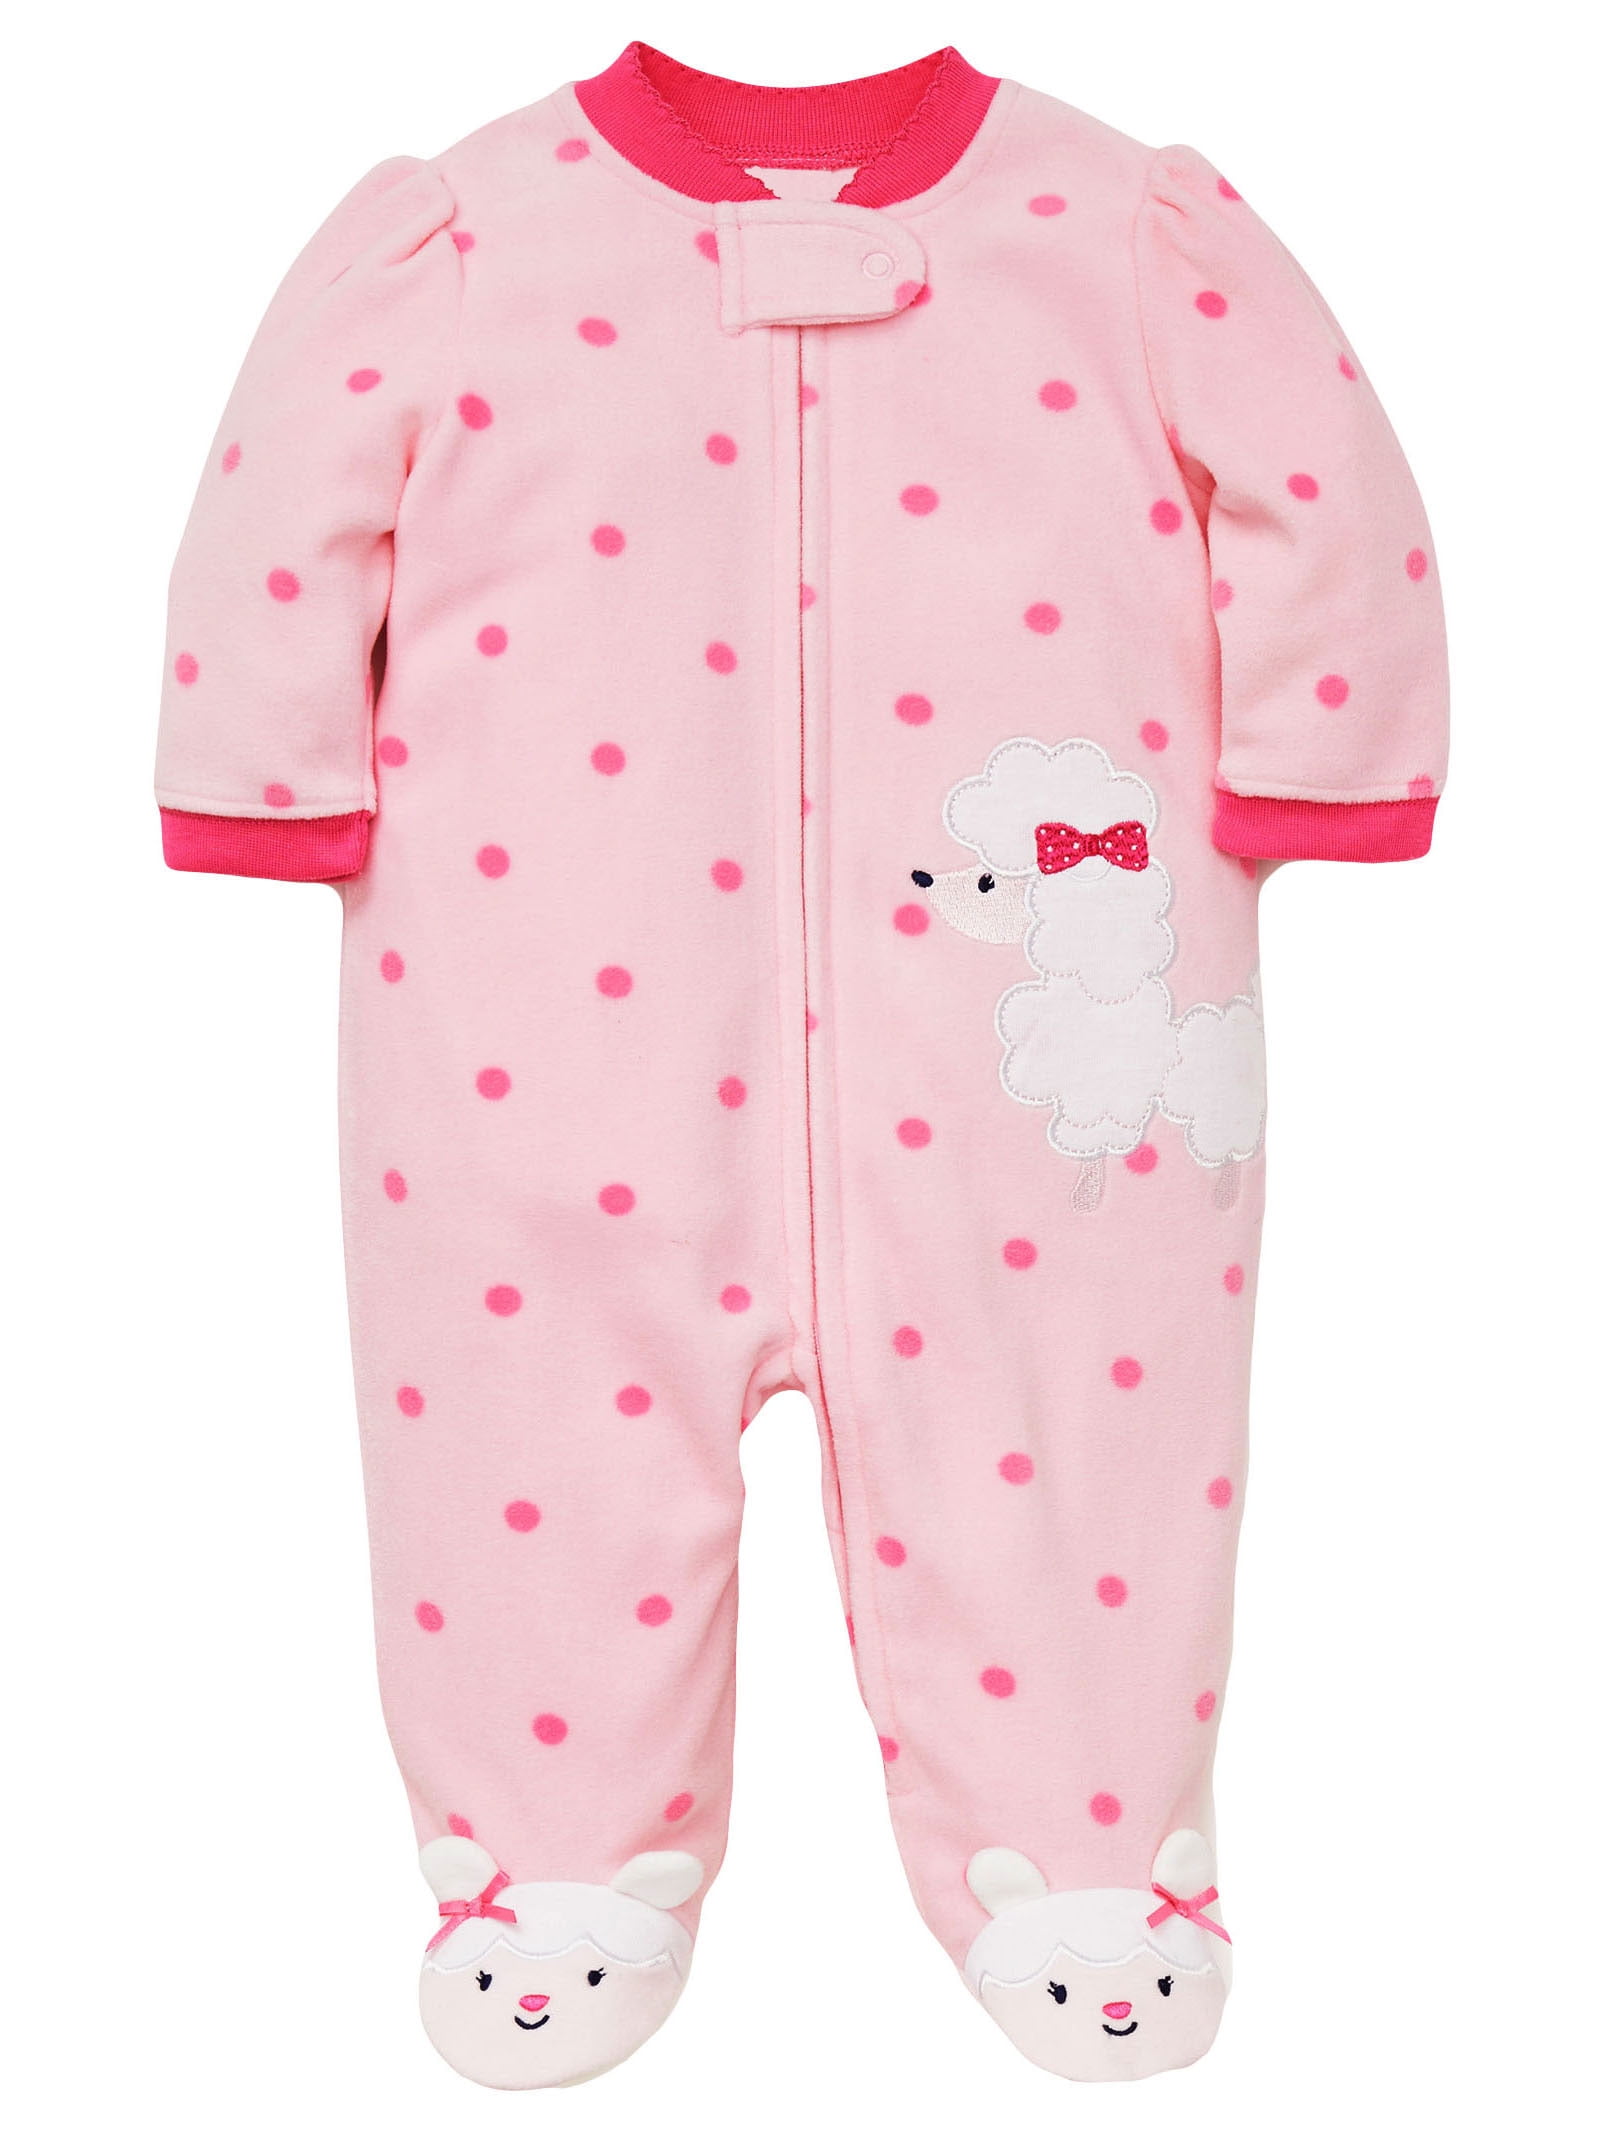 winter sleepers for babies